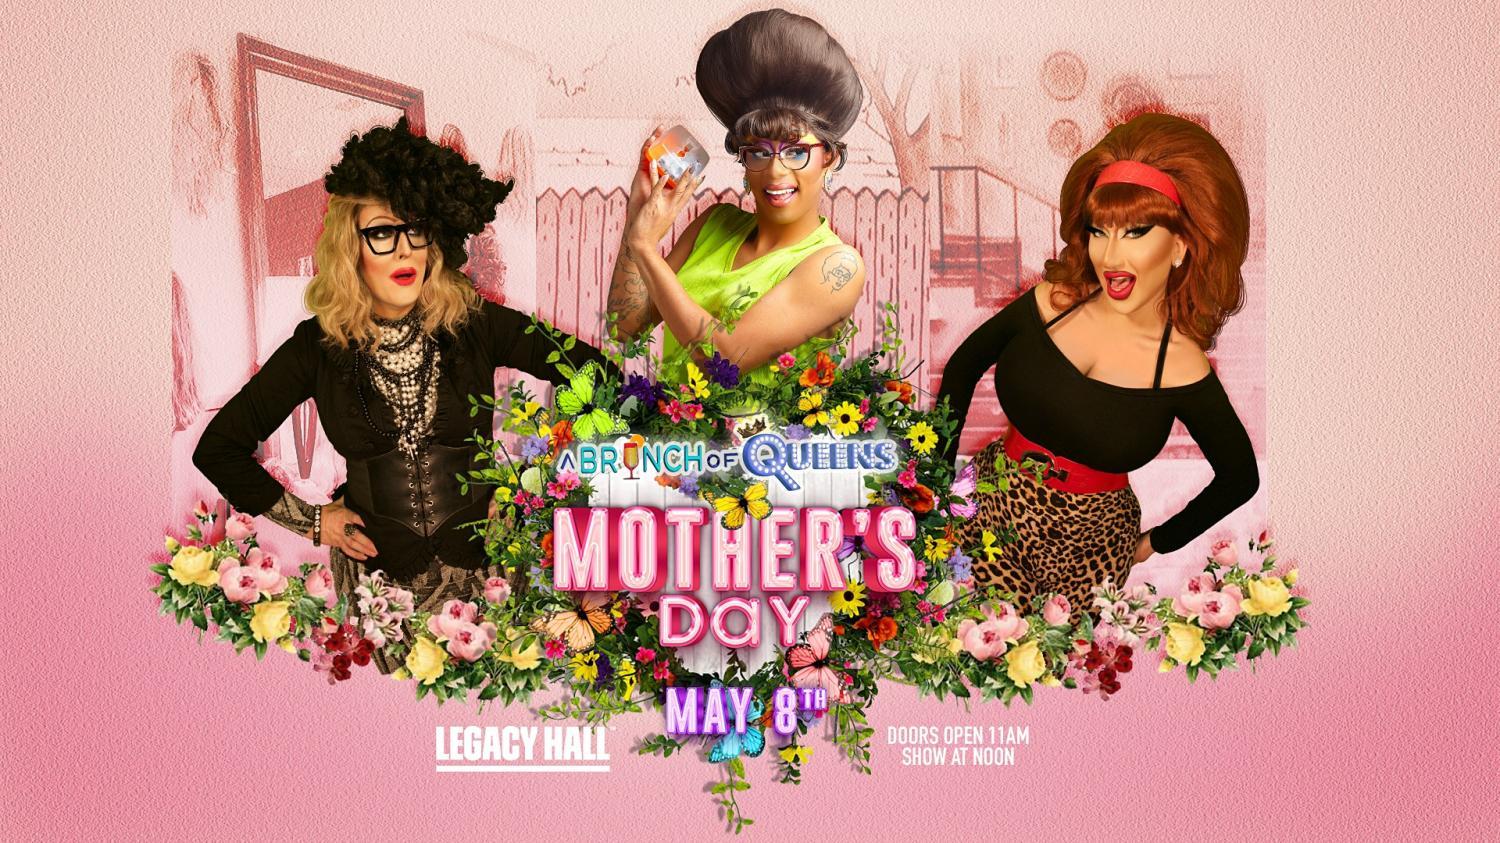 Mother's Day Drag Brunch at Legacy Hall